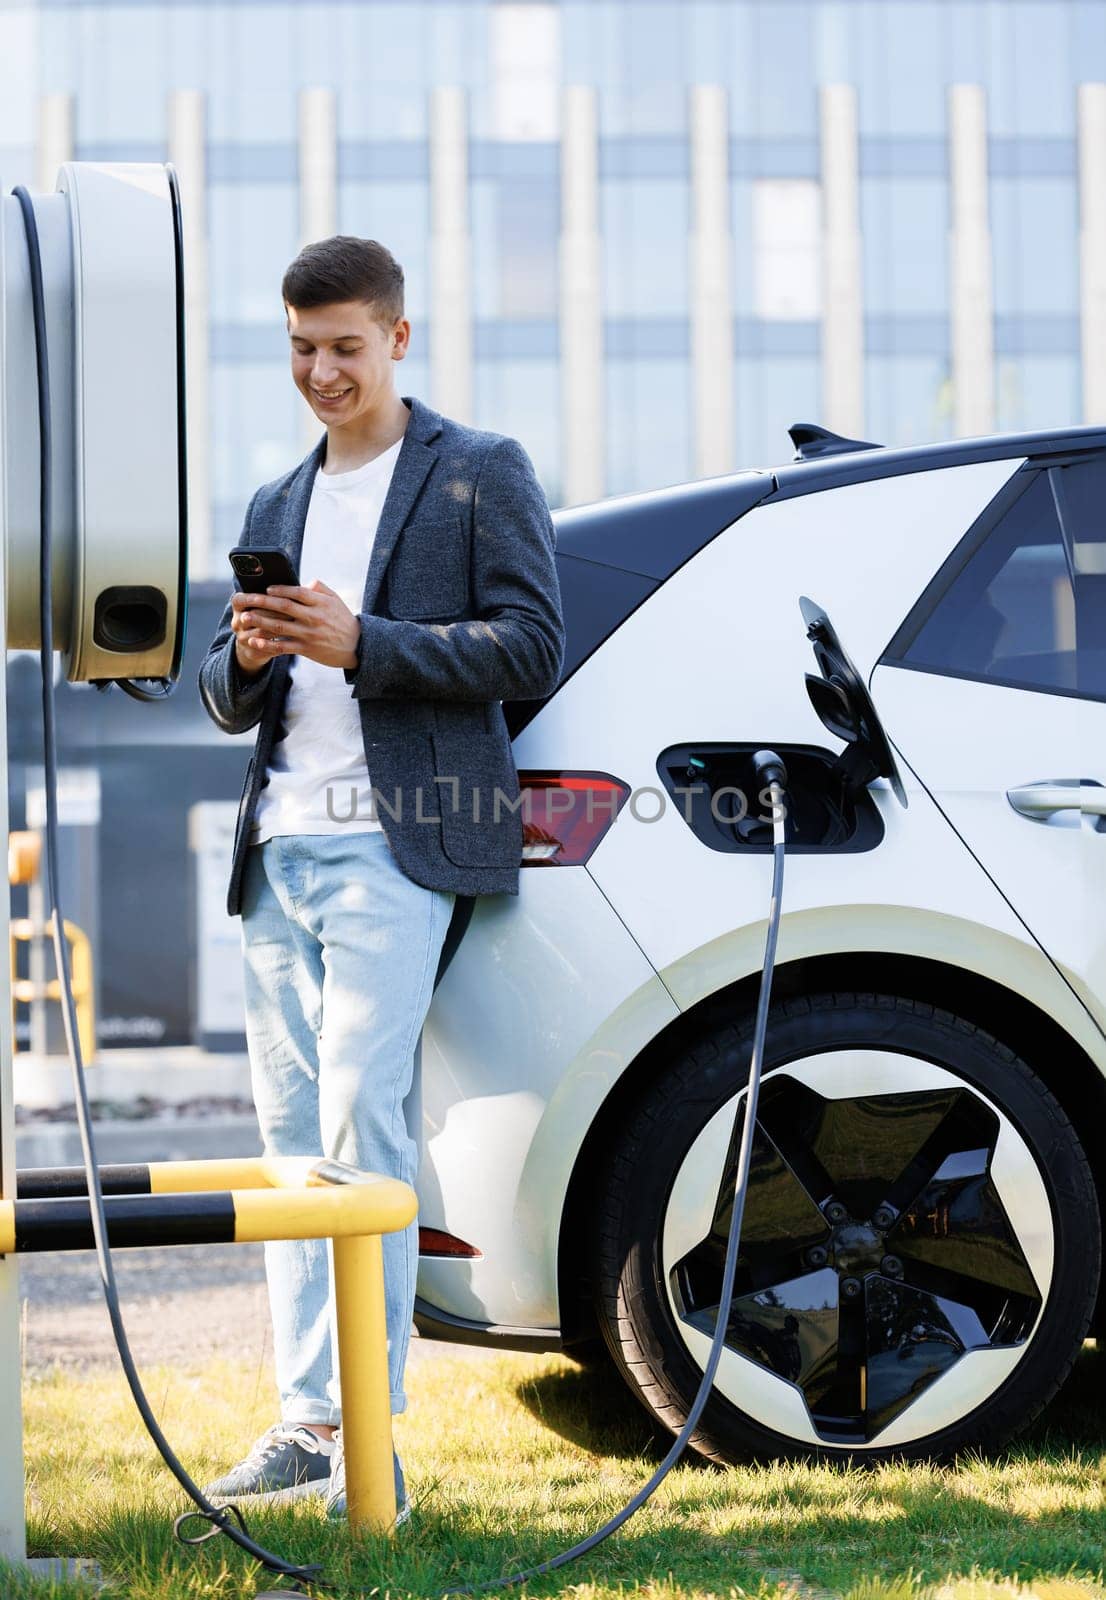 Young man using smartphone near electric car on charging station. Man holding smartphone while charging car at electric vehicle charging station. Businessman standing in background and waiting by uflypro